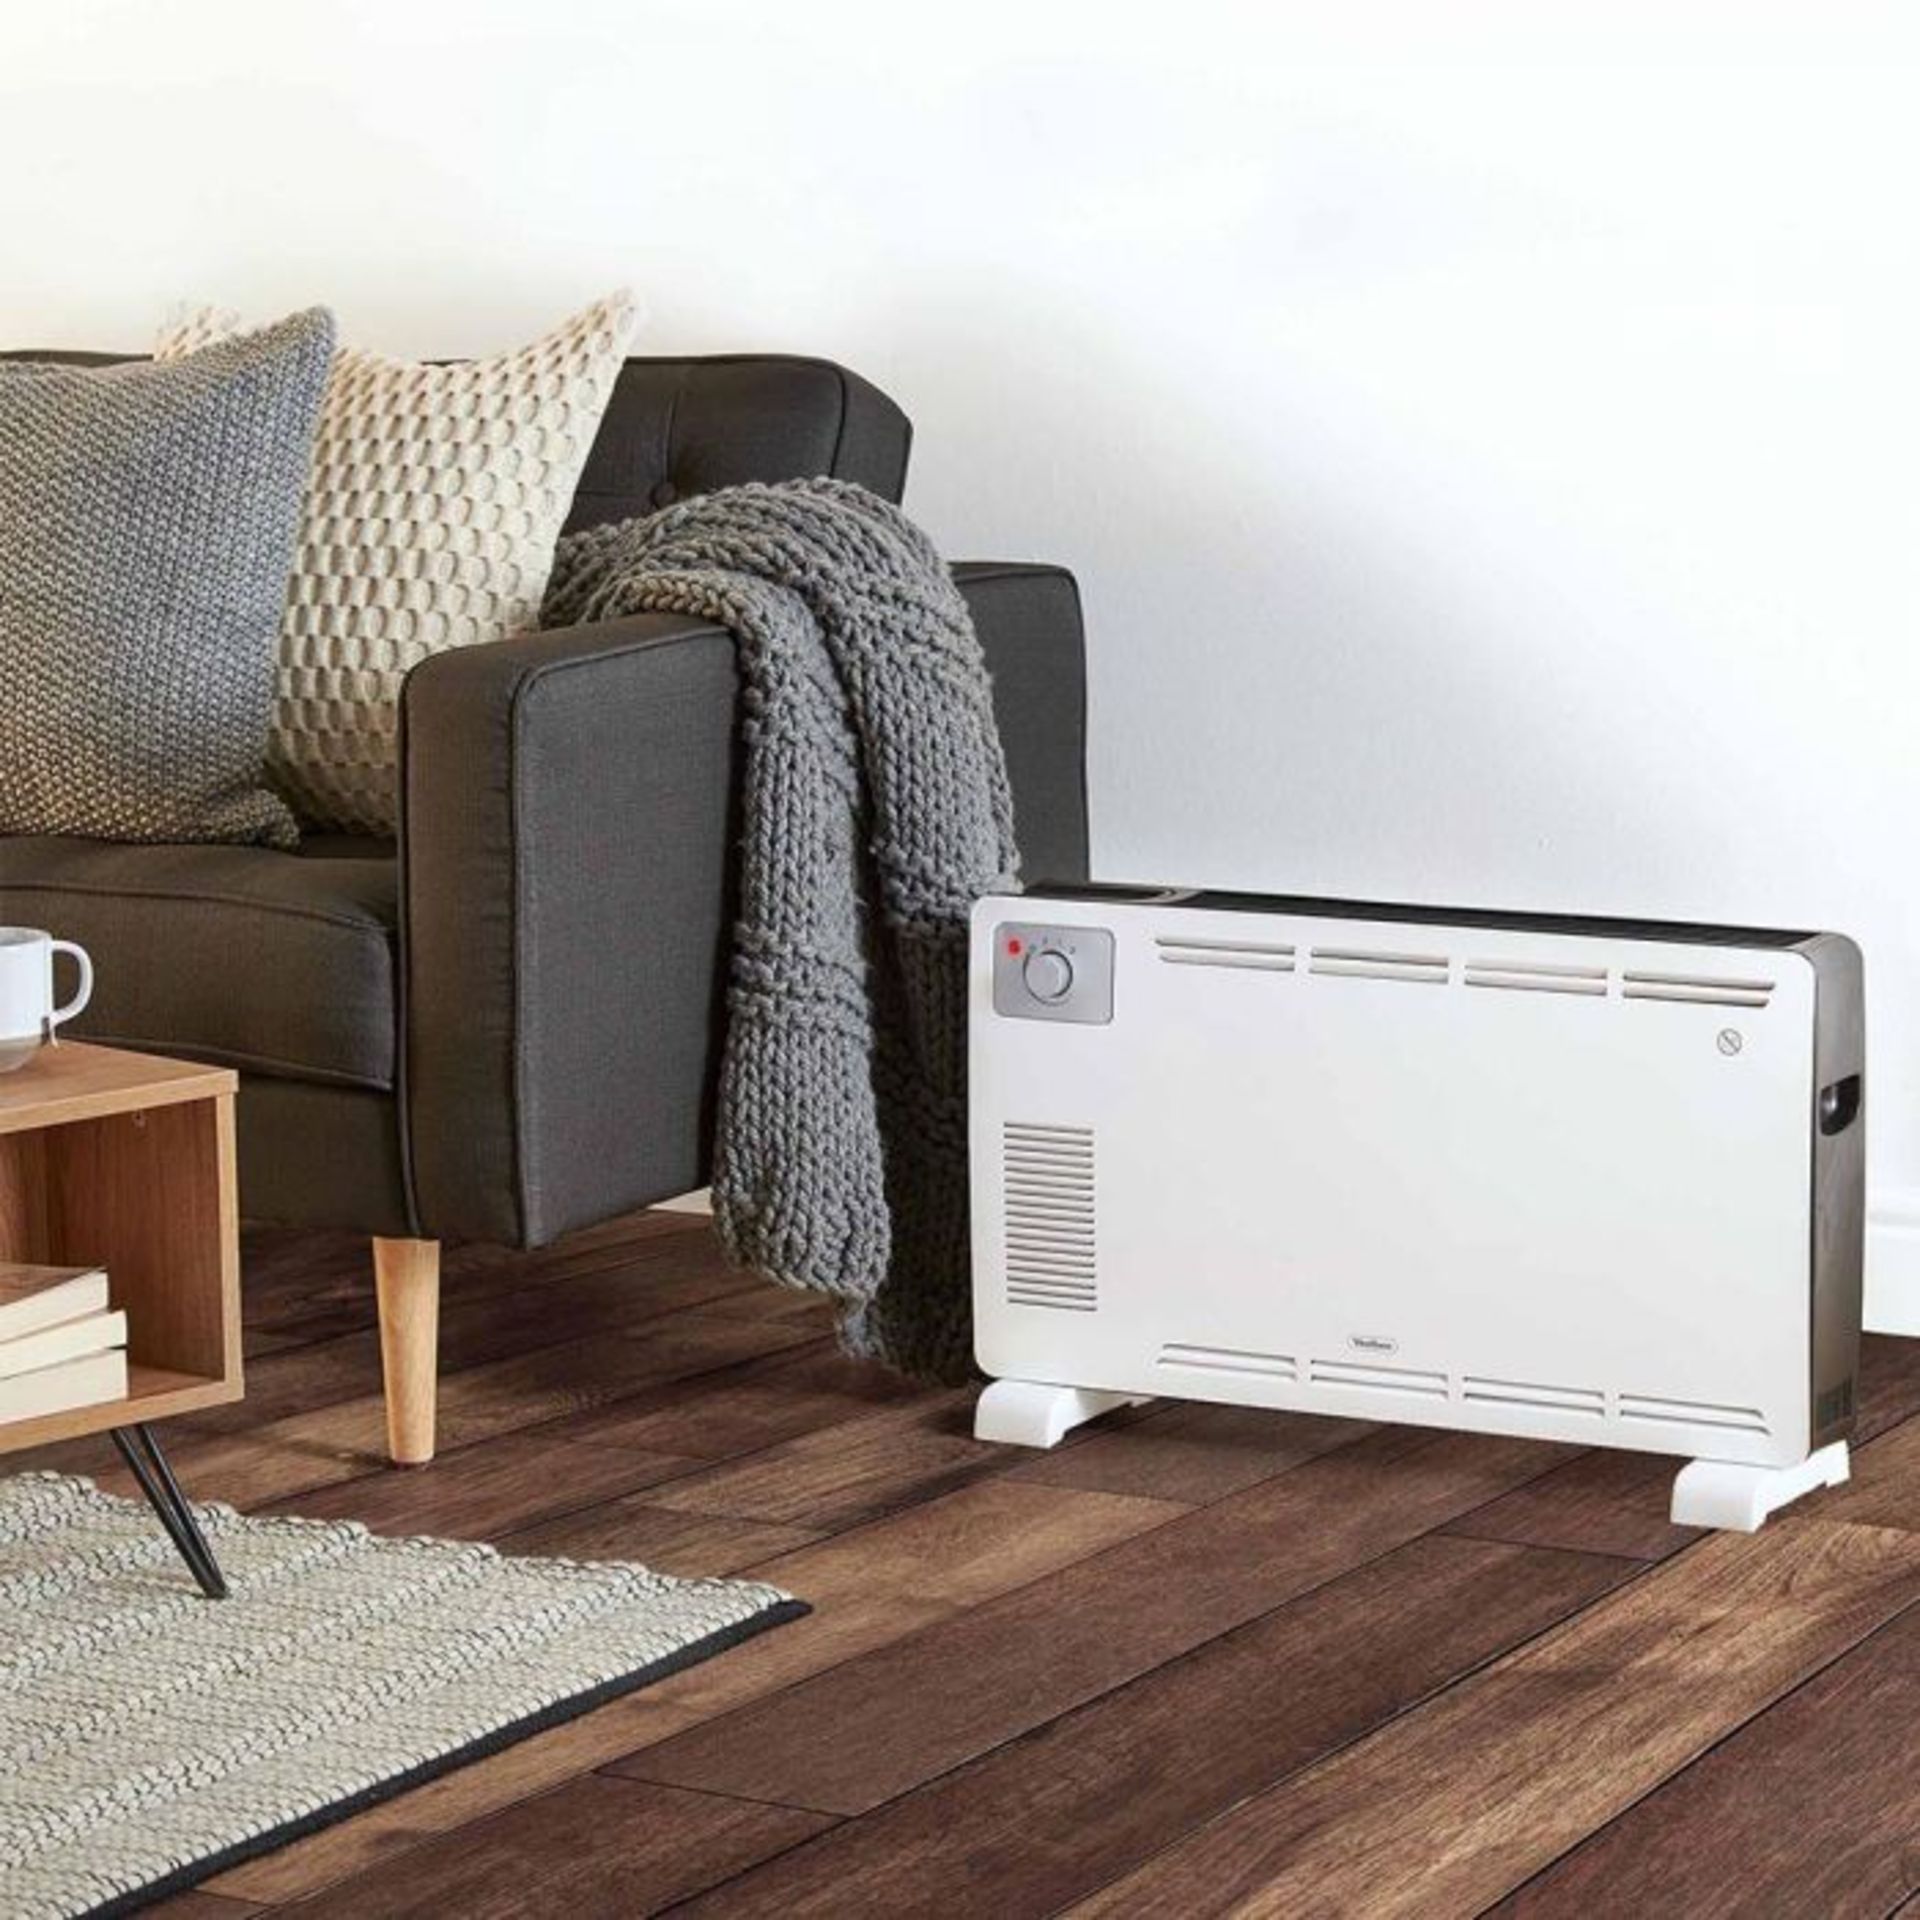 2200W Convector Heater - White. This convector heats up quickly thanks to convection technology. - Image 2 of 4